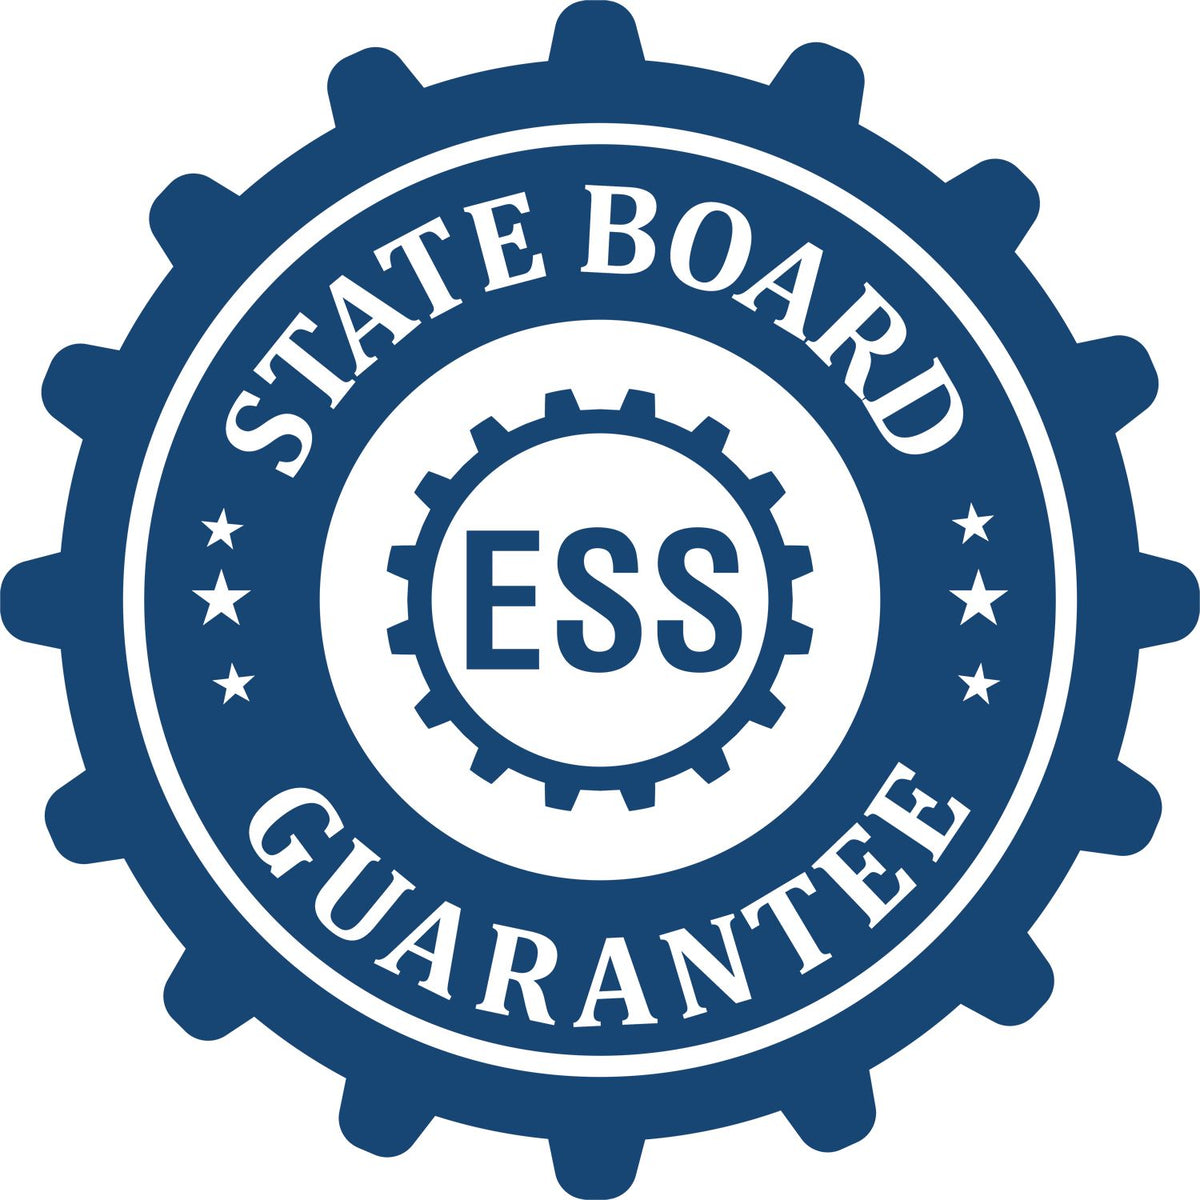 An emblem in a gear shape illustrating a state board guarantee for the State of Vermont Extended Long Reach Engineer Seal product.